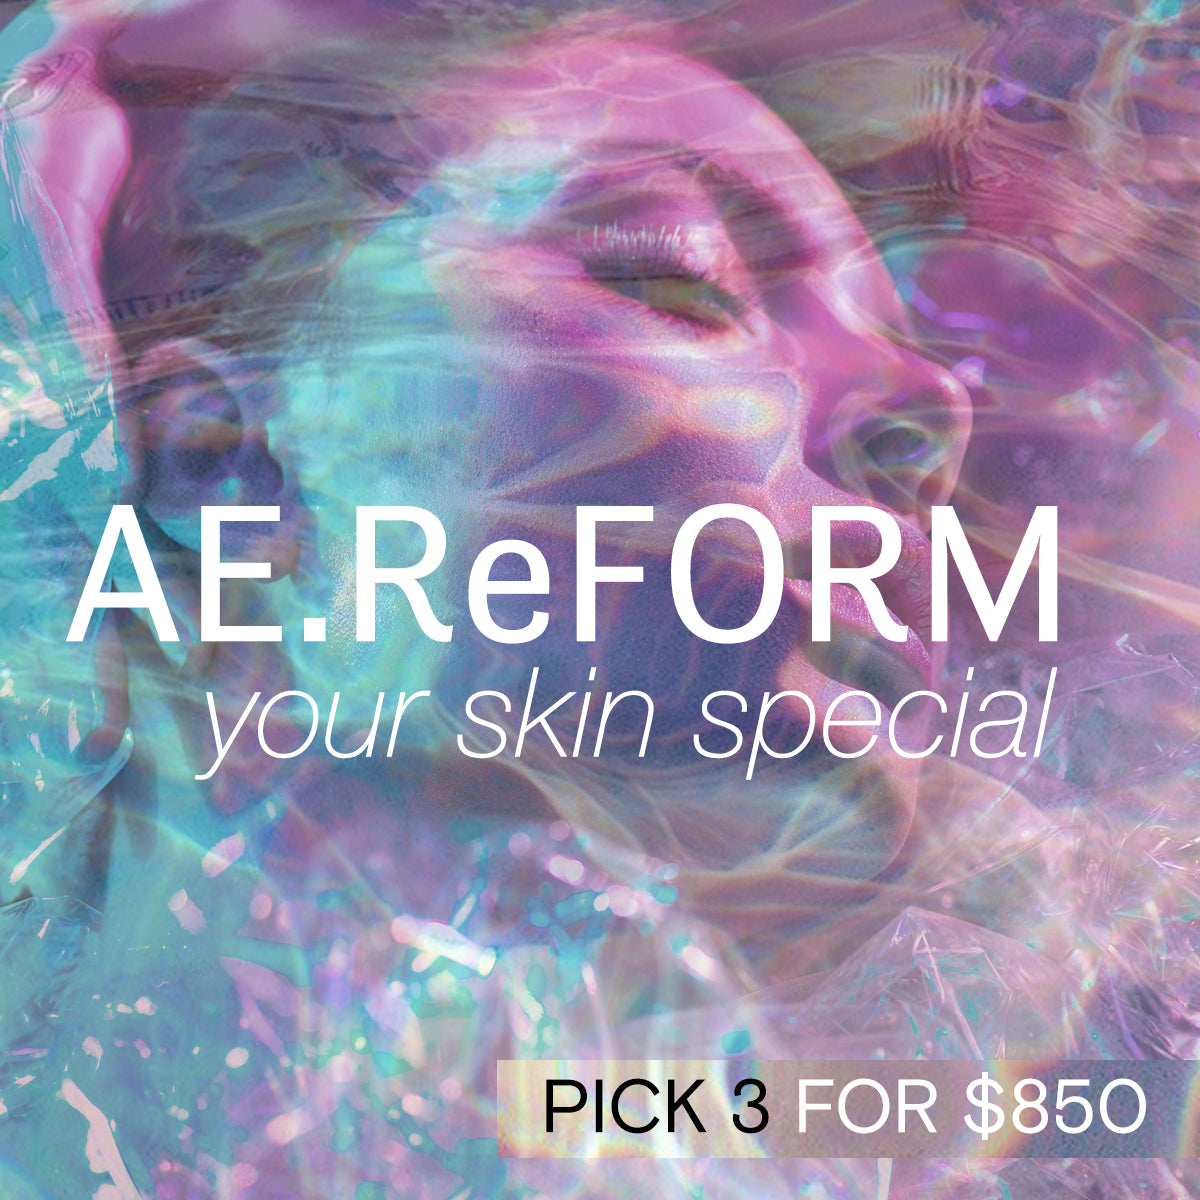 MARCH SPECIAL #1 - AE.Reform Your Skin Special - $850